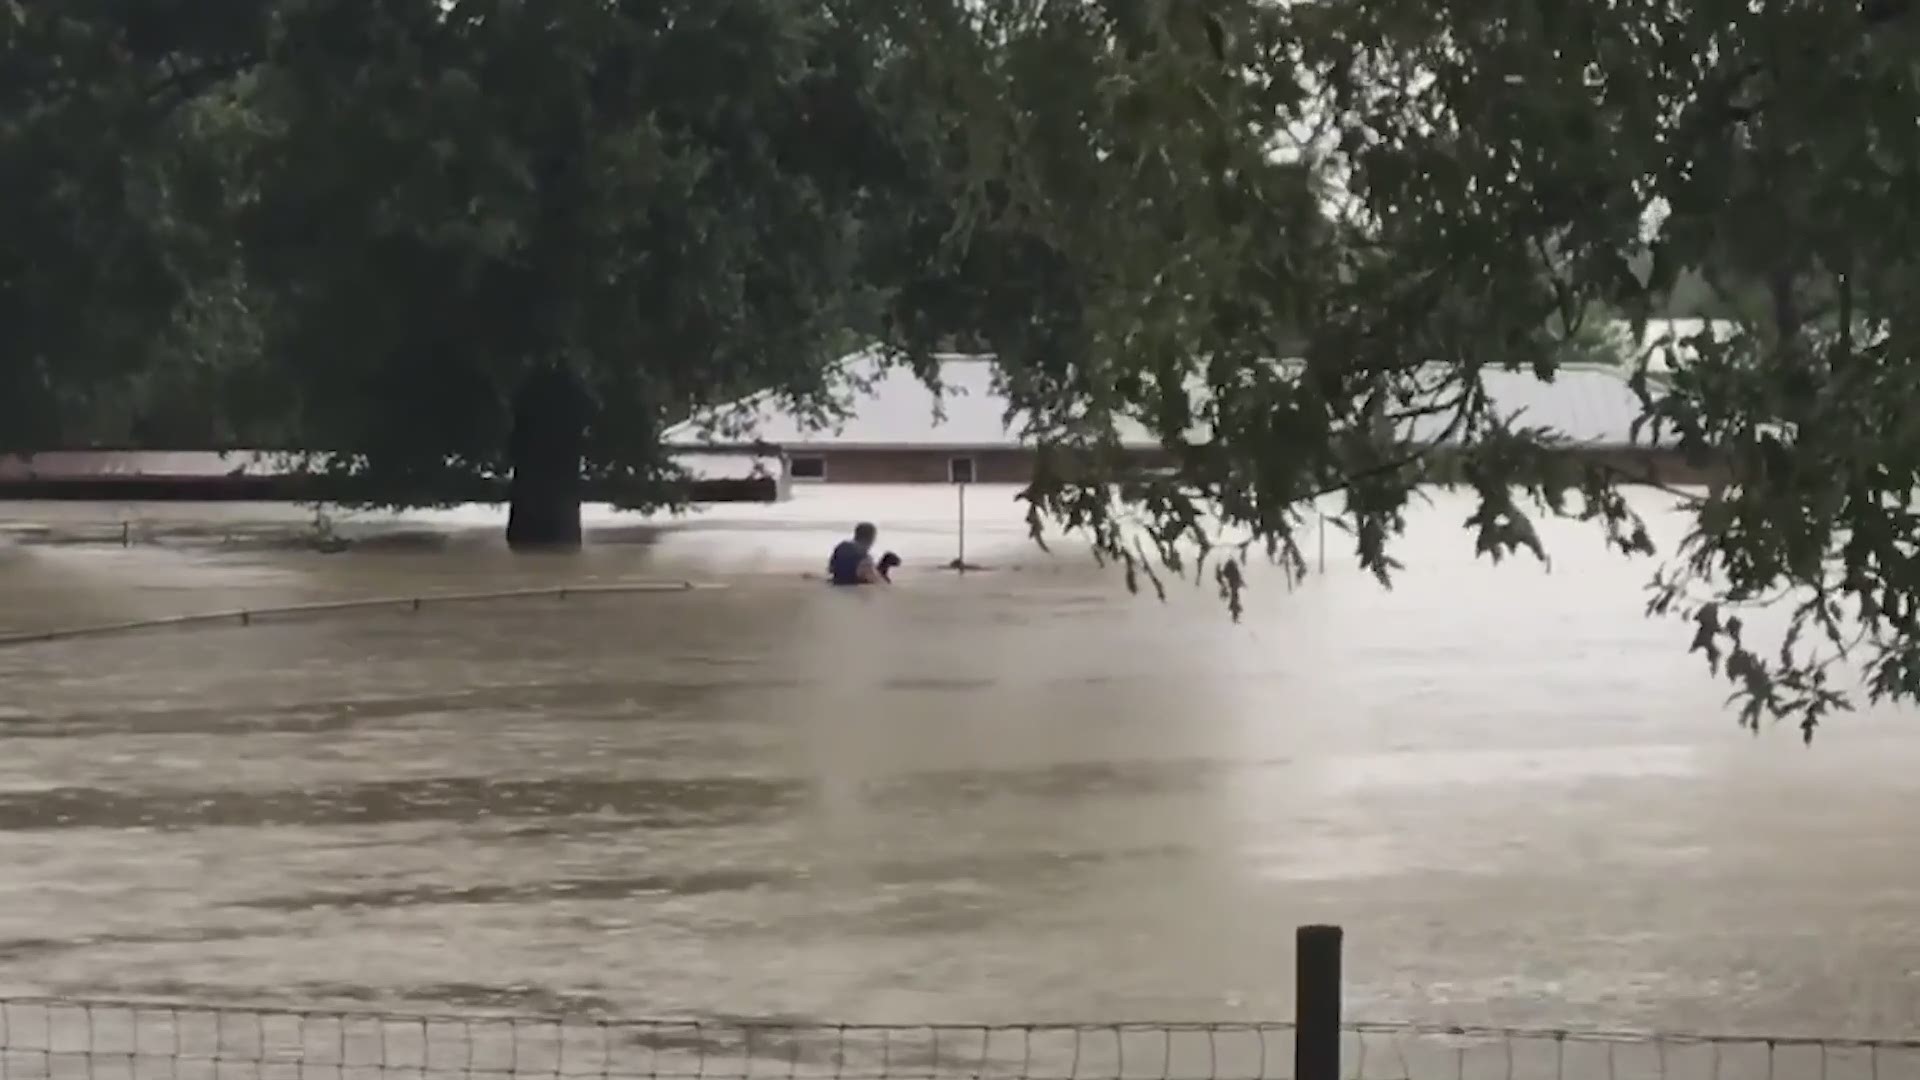 KHOU's Jason Miles captured this video of a man rescuing a baby goat from Imelda's floodwaters in Kingwood on Sept. 19, 2019. The storm battered the community.